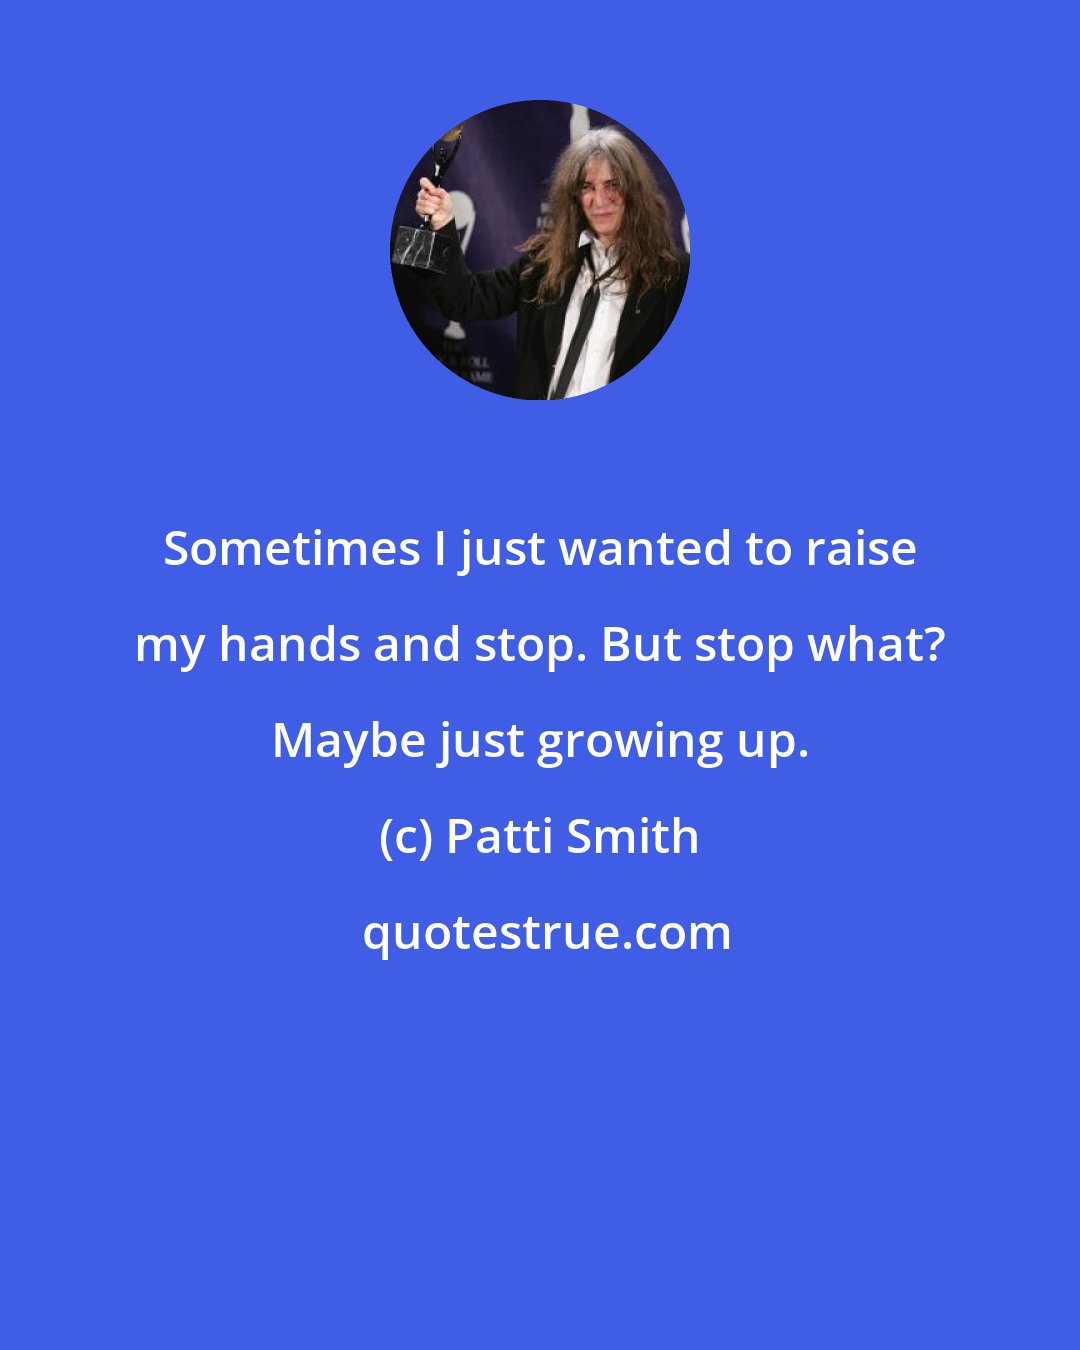 Patti Smith: Sometimes I just wanted to raise my hands and stop. But stop what? Maybe just growing up.